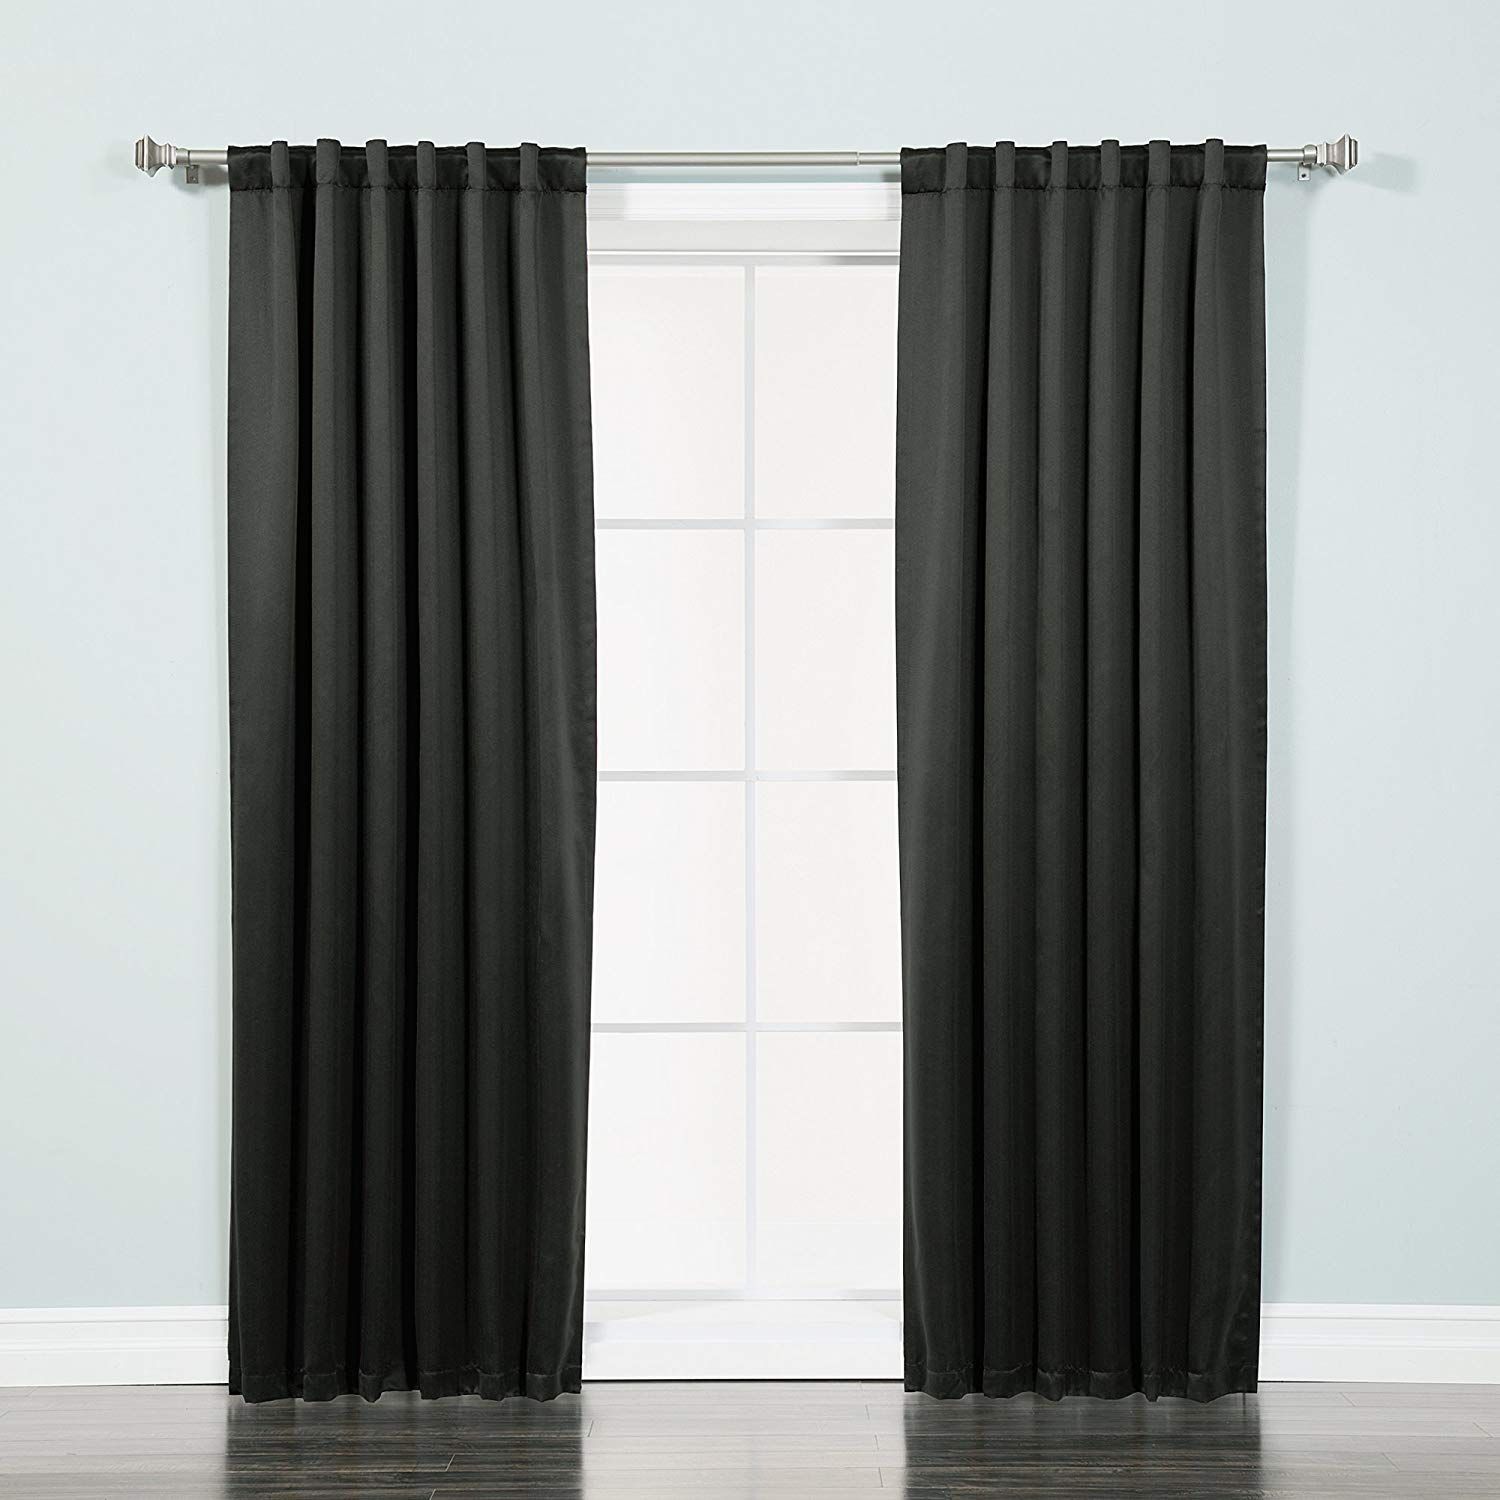 Fascinating Black Out Curtains Amazon Com Best Home Fashion Pertaining To Solid Insulated Thermal Blackout Long Length Curtain Panel Pairs (View 8 of 30)